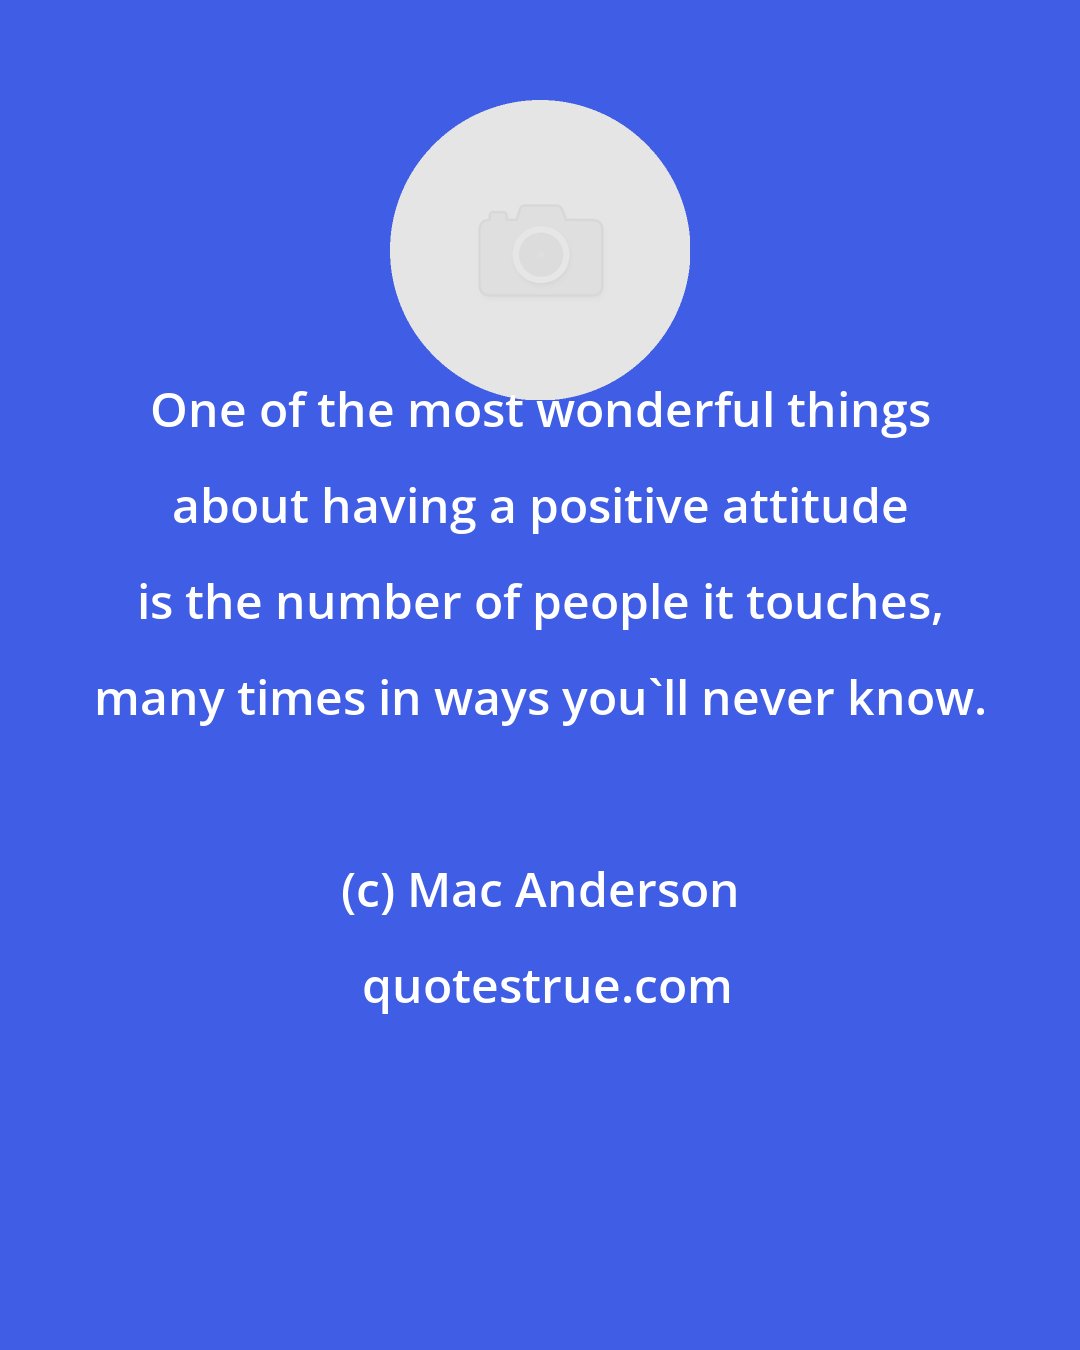 Mac Anderson: One of the most wonderful things about having a positive attitude is the number of people it touches, many times in ways you'll never know.